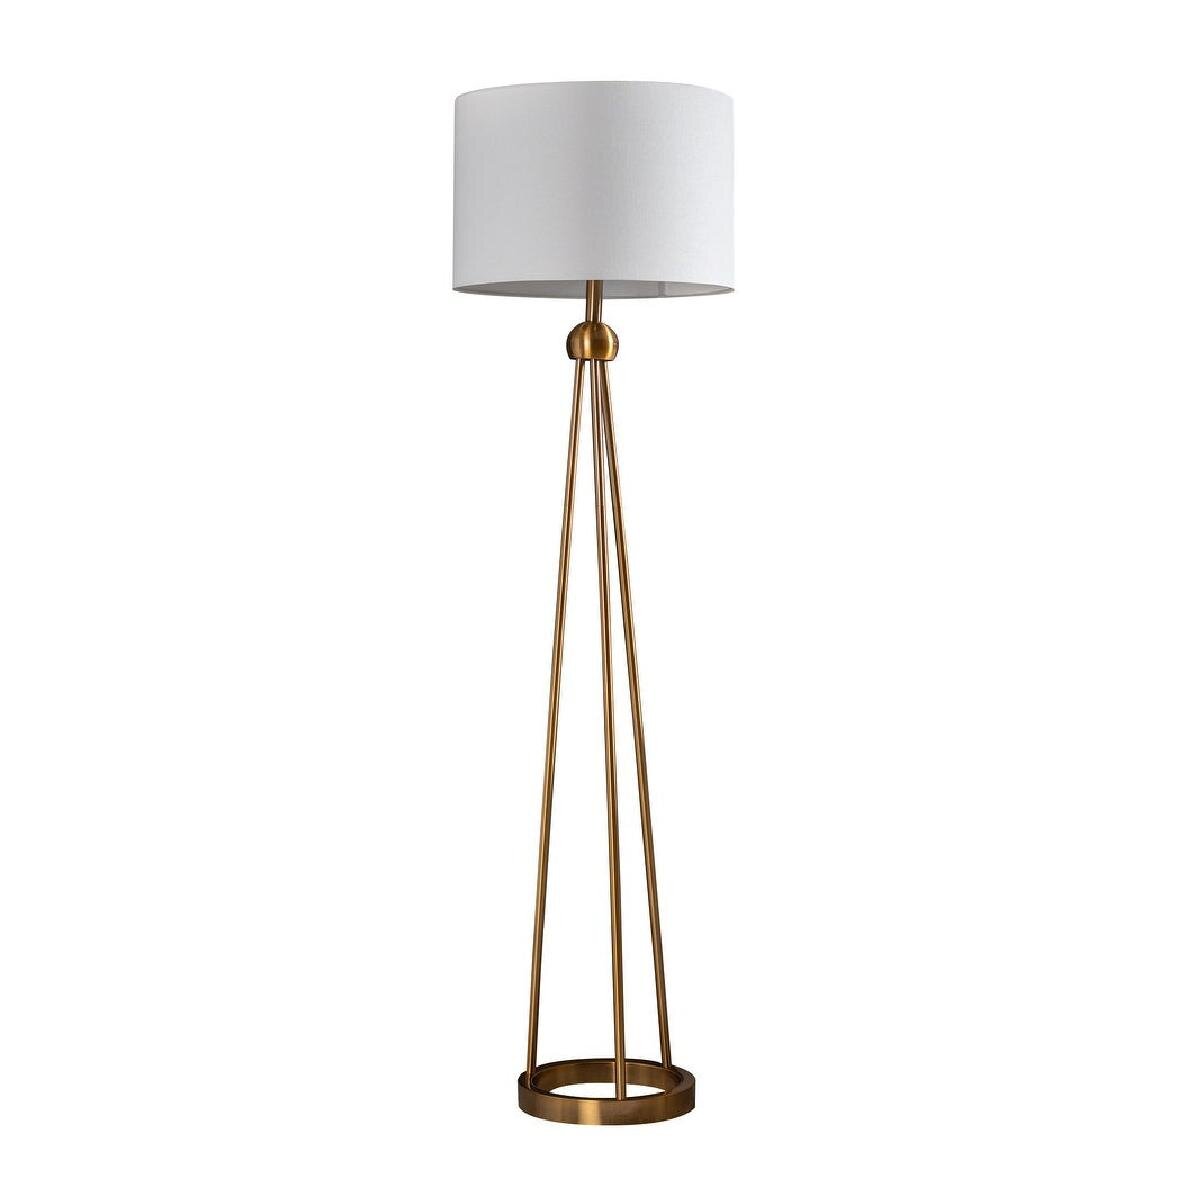 The High/Low List: French Country Edition - High end furniture and decor and budget friendly lookalikes. Brass floor lamp with drum shade | Nadine Stay